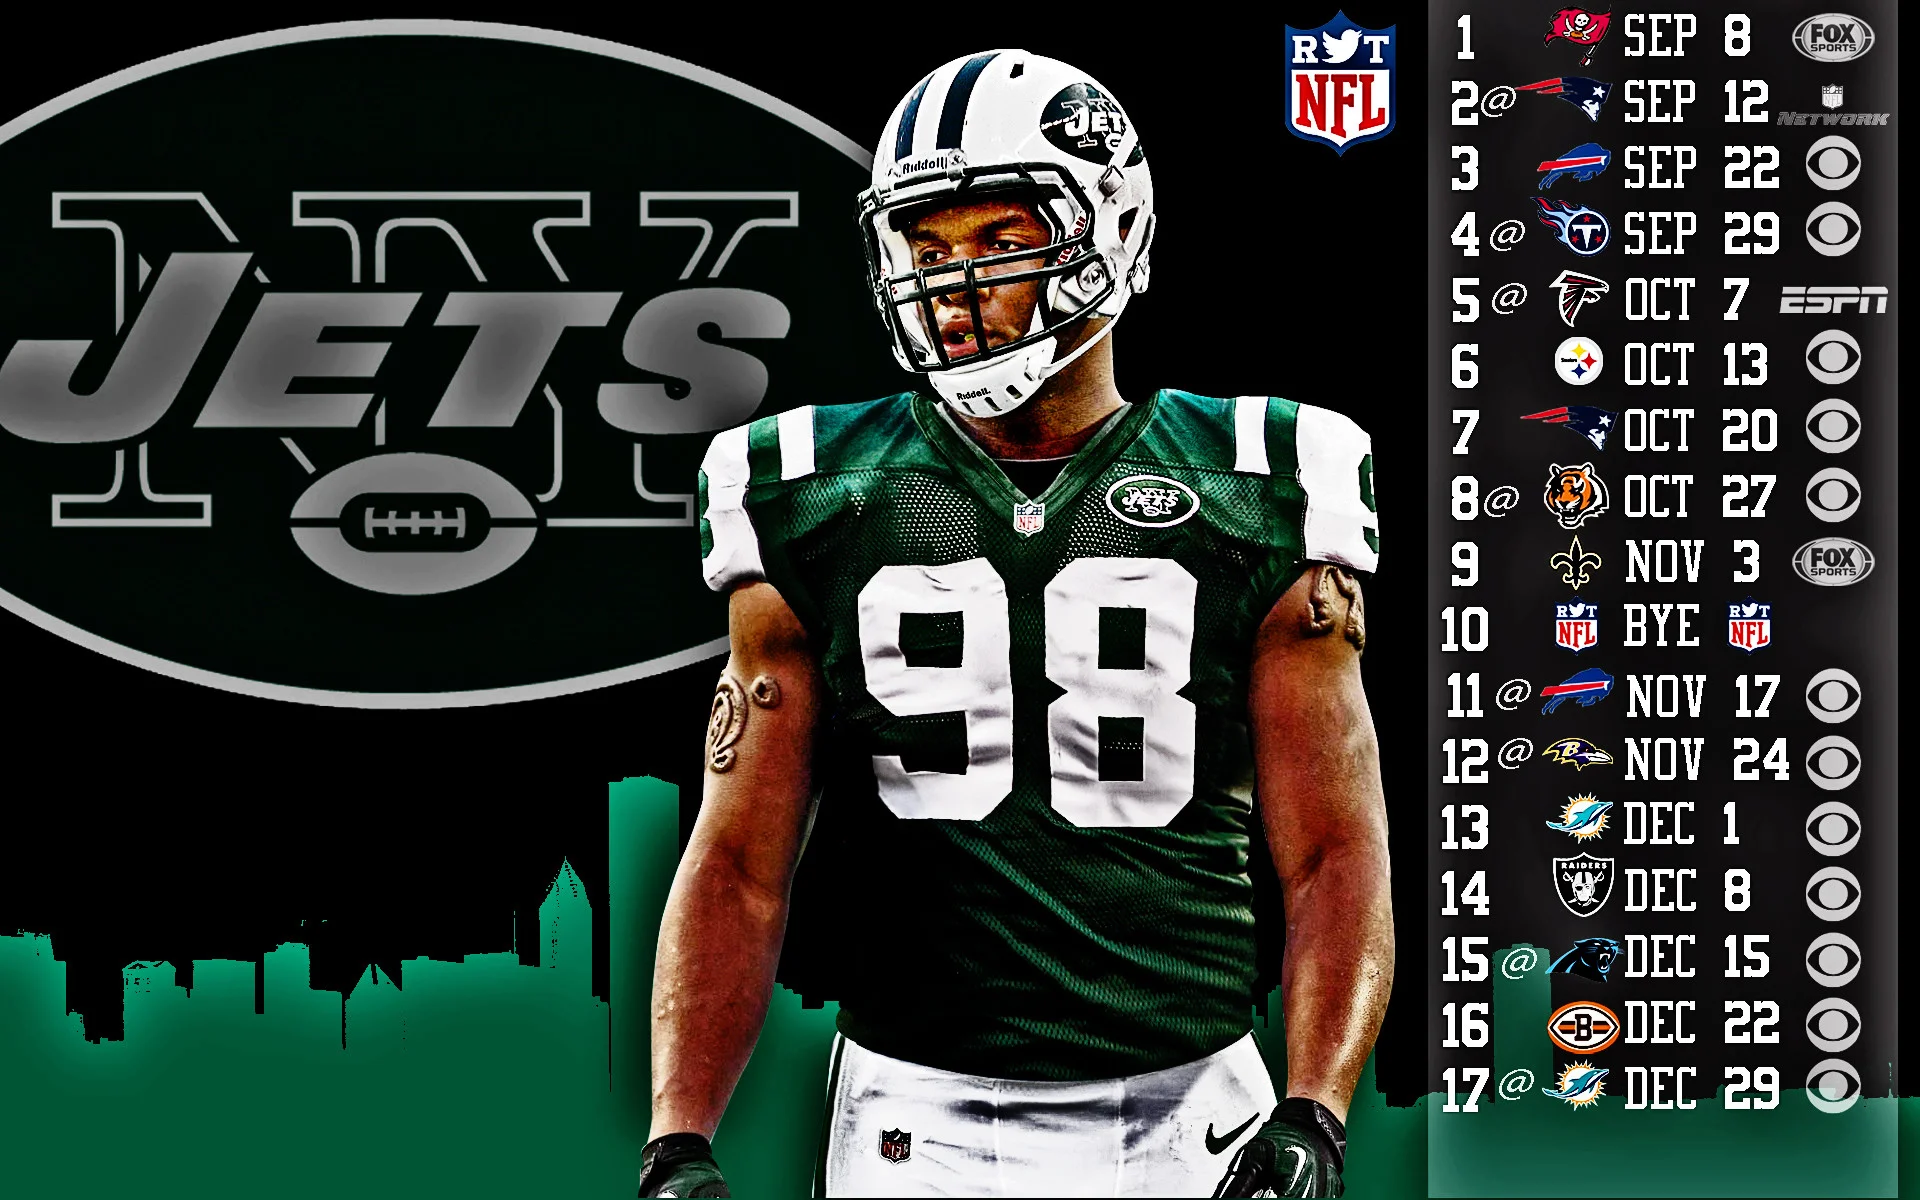 Download wallpapers 4k, New York Jets, grunge, NFL, american football, NFC,  USA, art, NY Jets, stone texture, logo, East Division for desktop with  resolution 3840x2400. High Quality HD pictures wallpapers